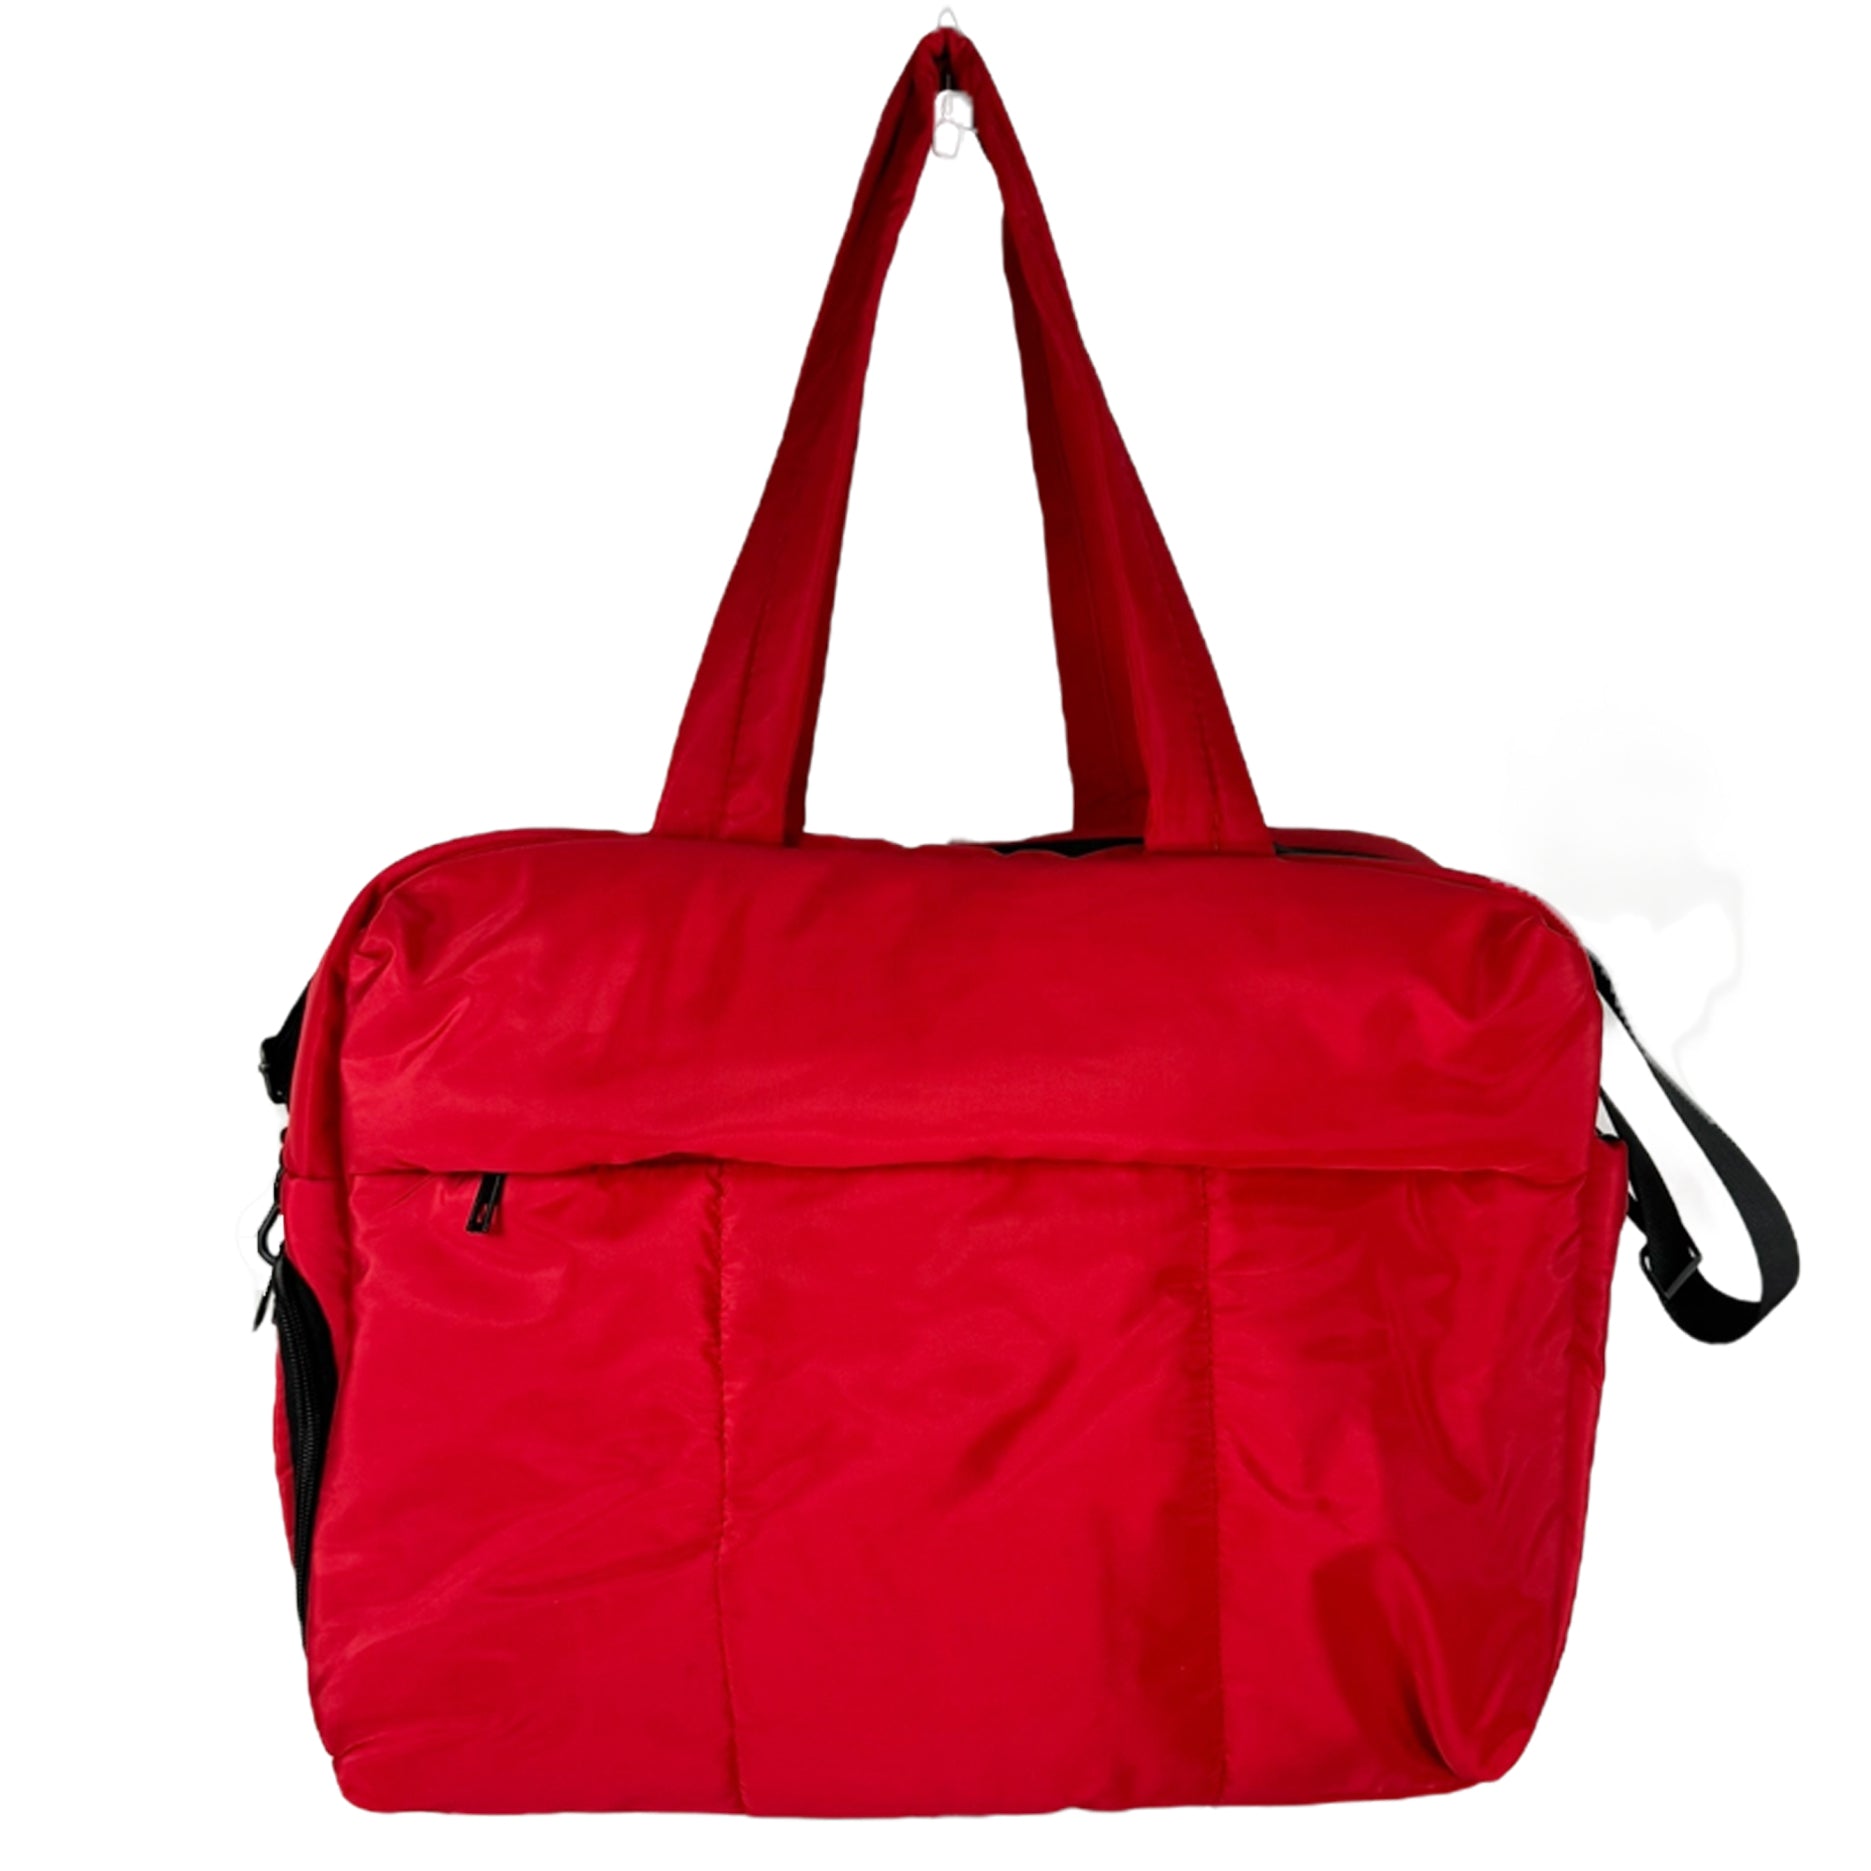 PC-4155 Tote/Duffle Red